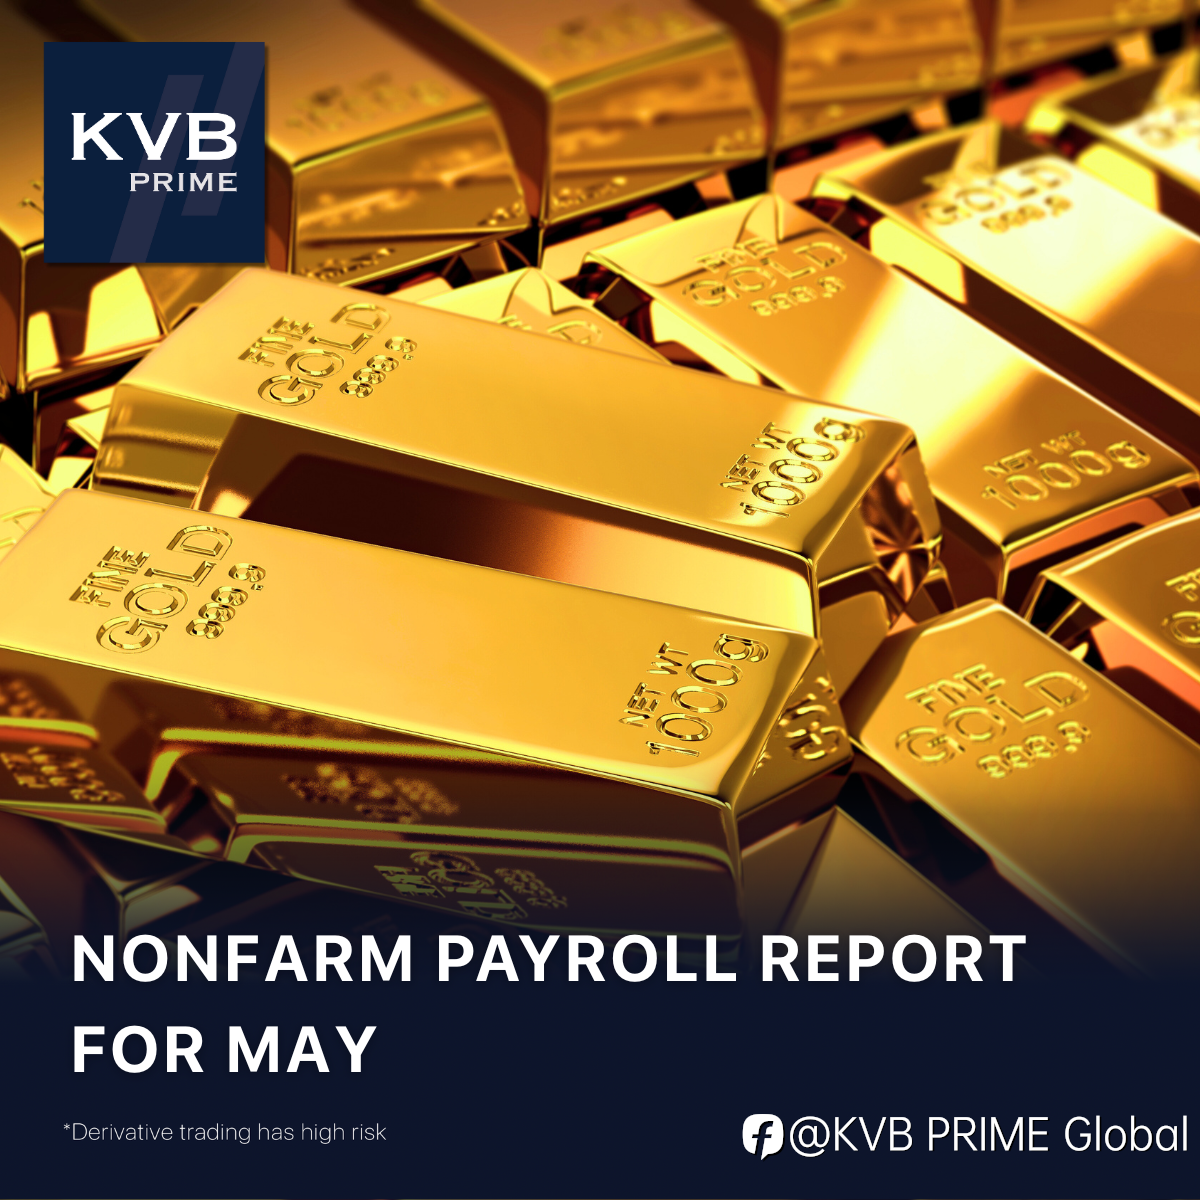 The non-farm payroll report brings a turning point warning at night! Can gold break through the $2000 mark again and become the center of attention?